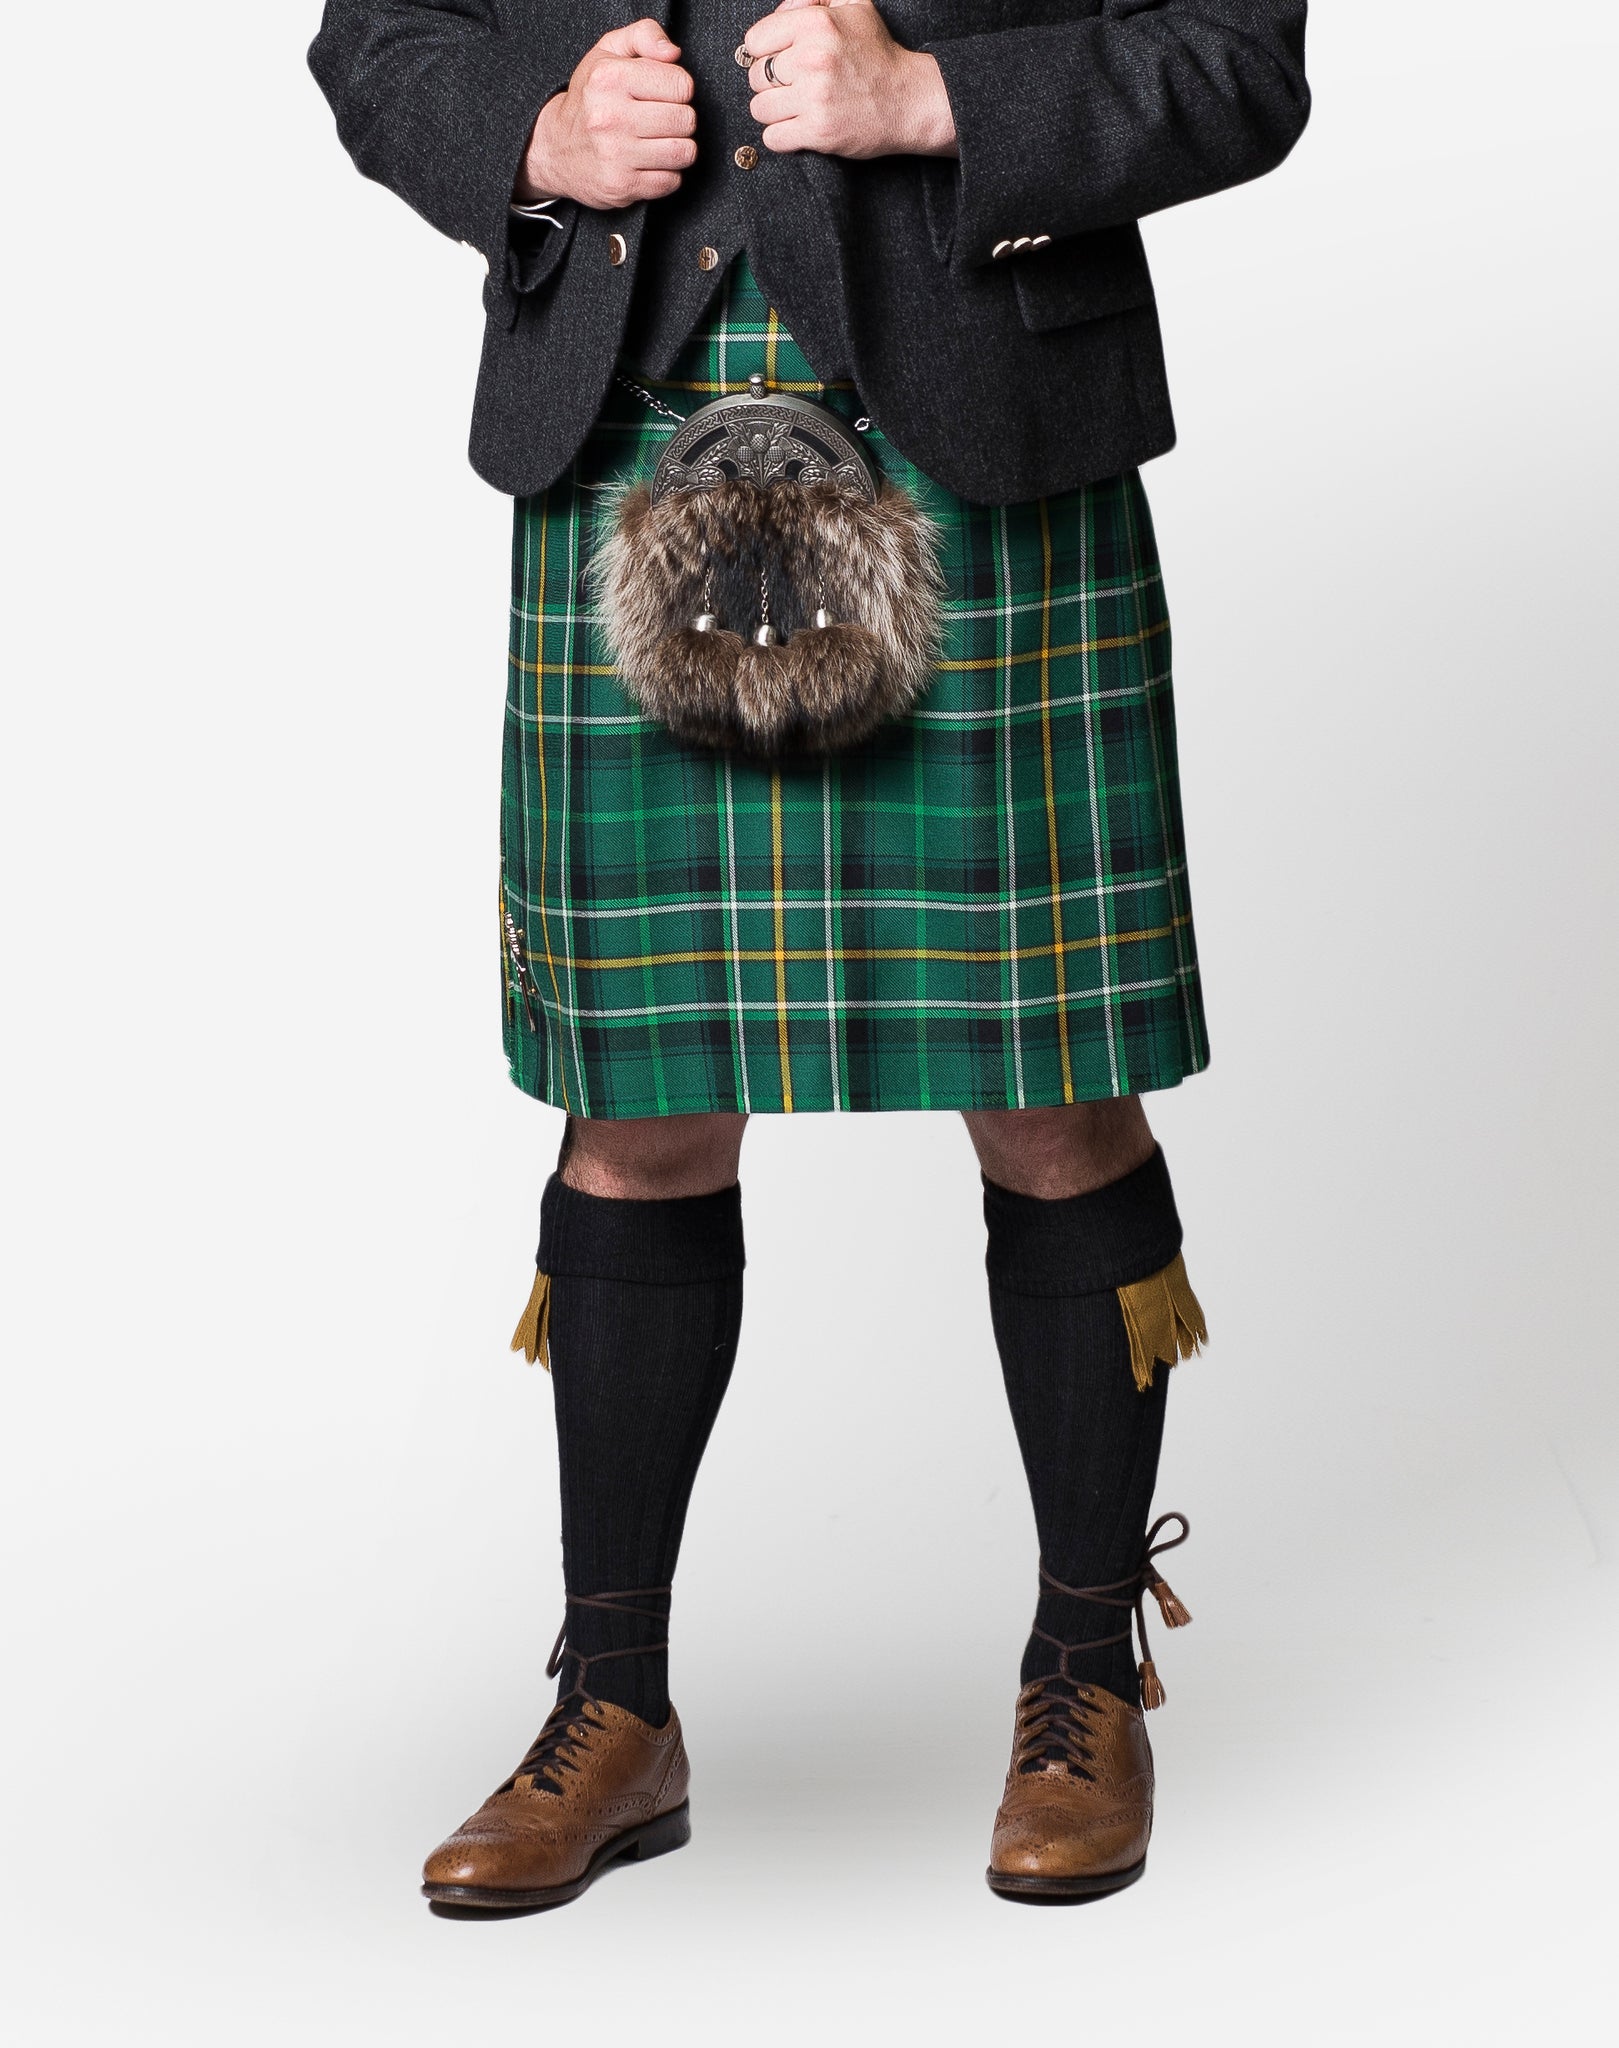 Celtic FC / Lovat Charcoal Tweed Hire Outfit